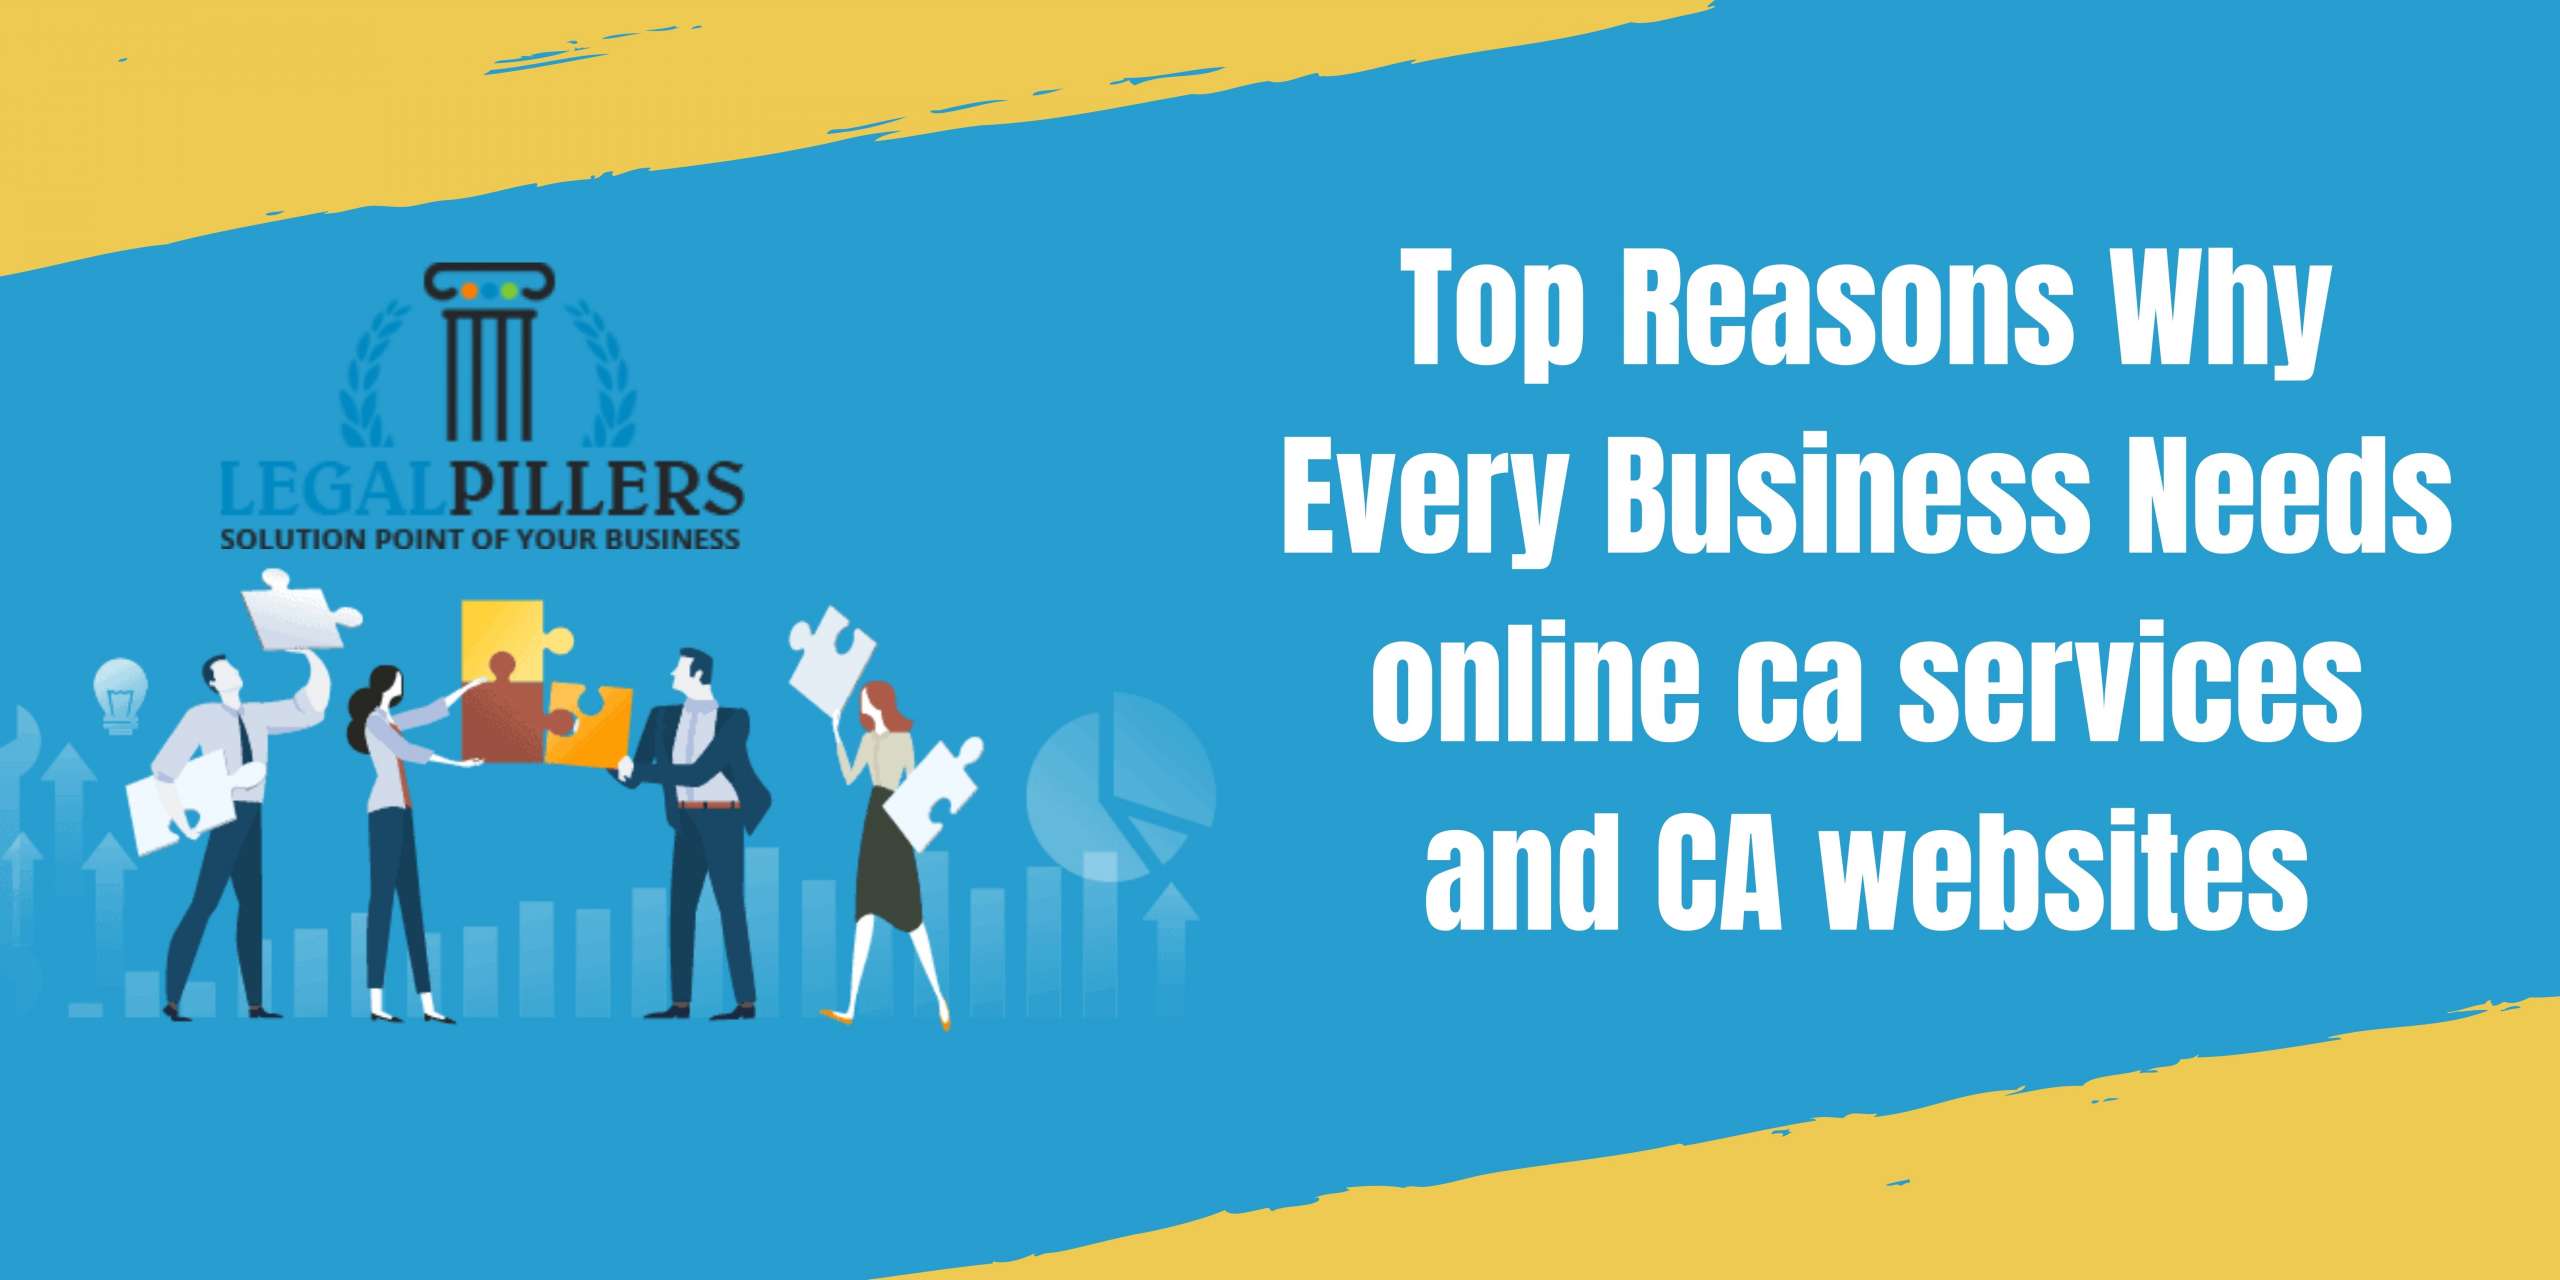 Top Reasons Why Every Business Needs Online Ca Services and CA Websites